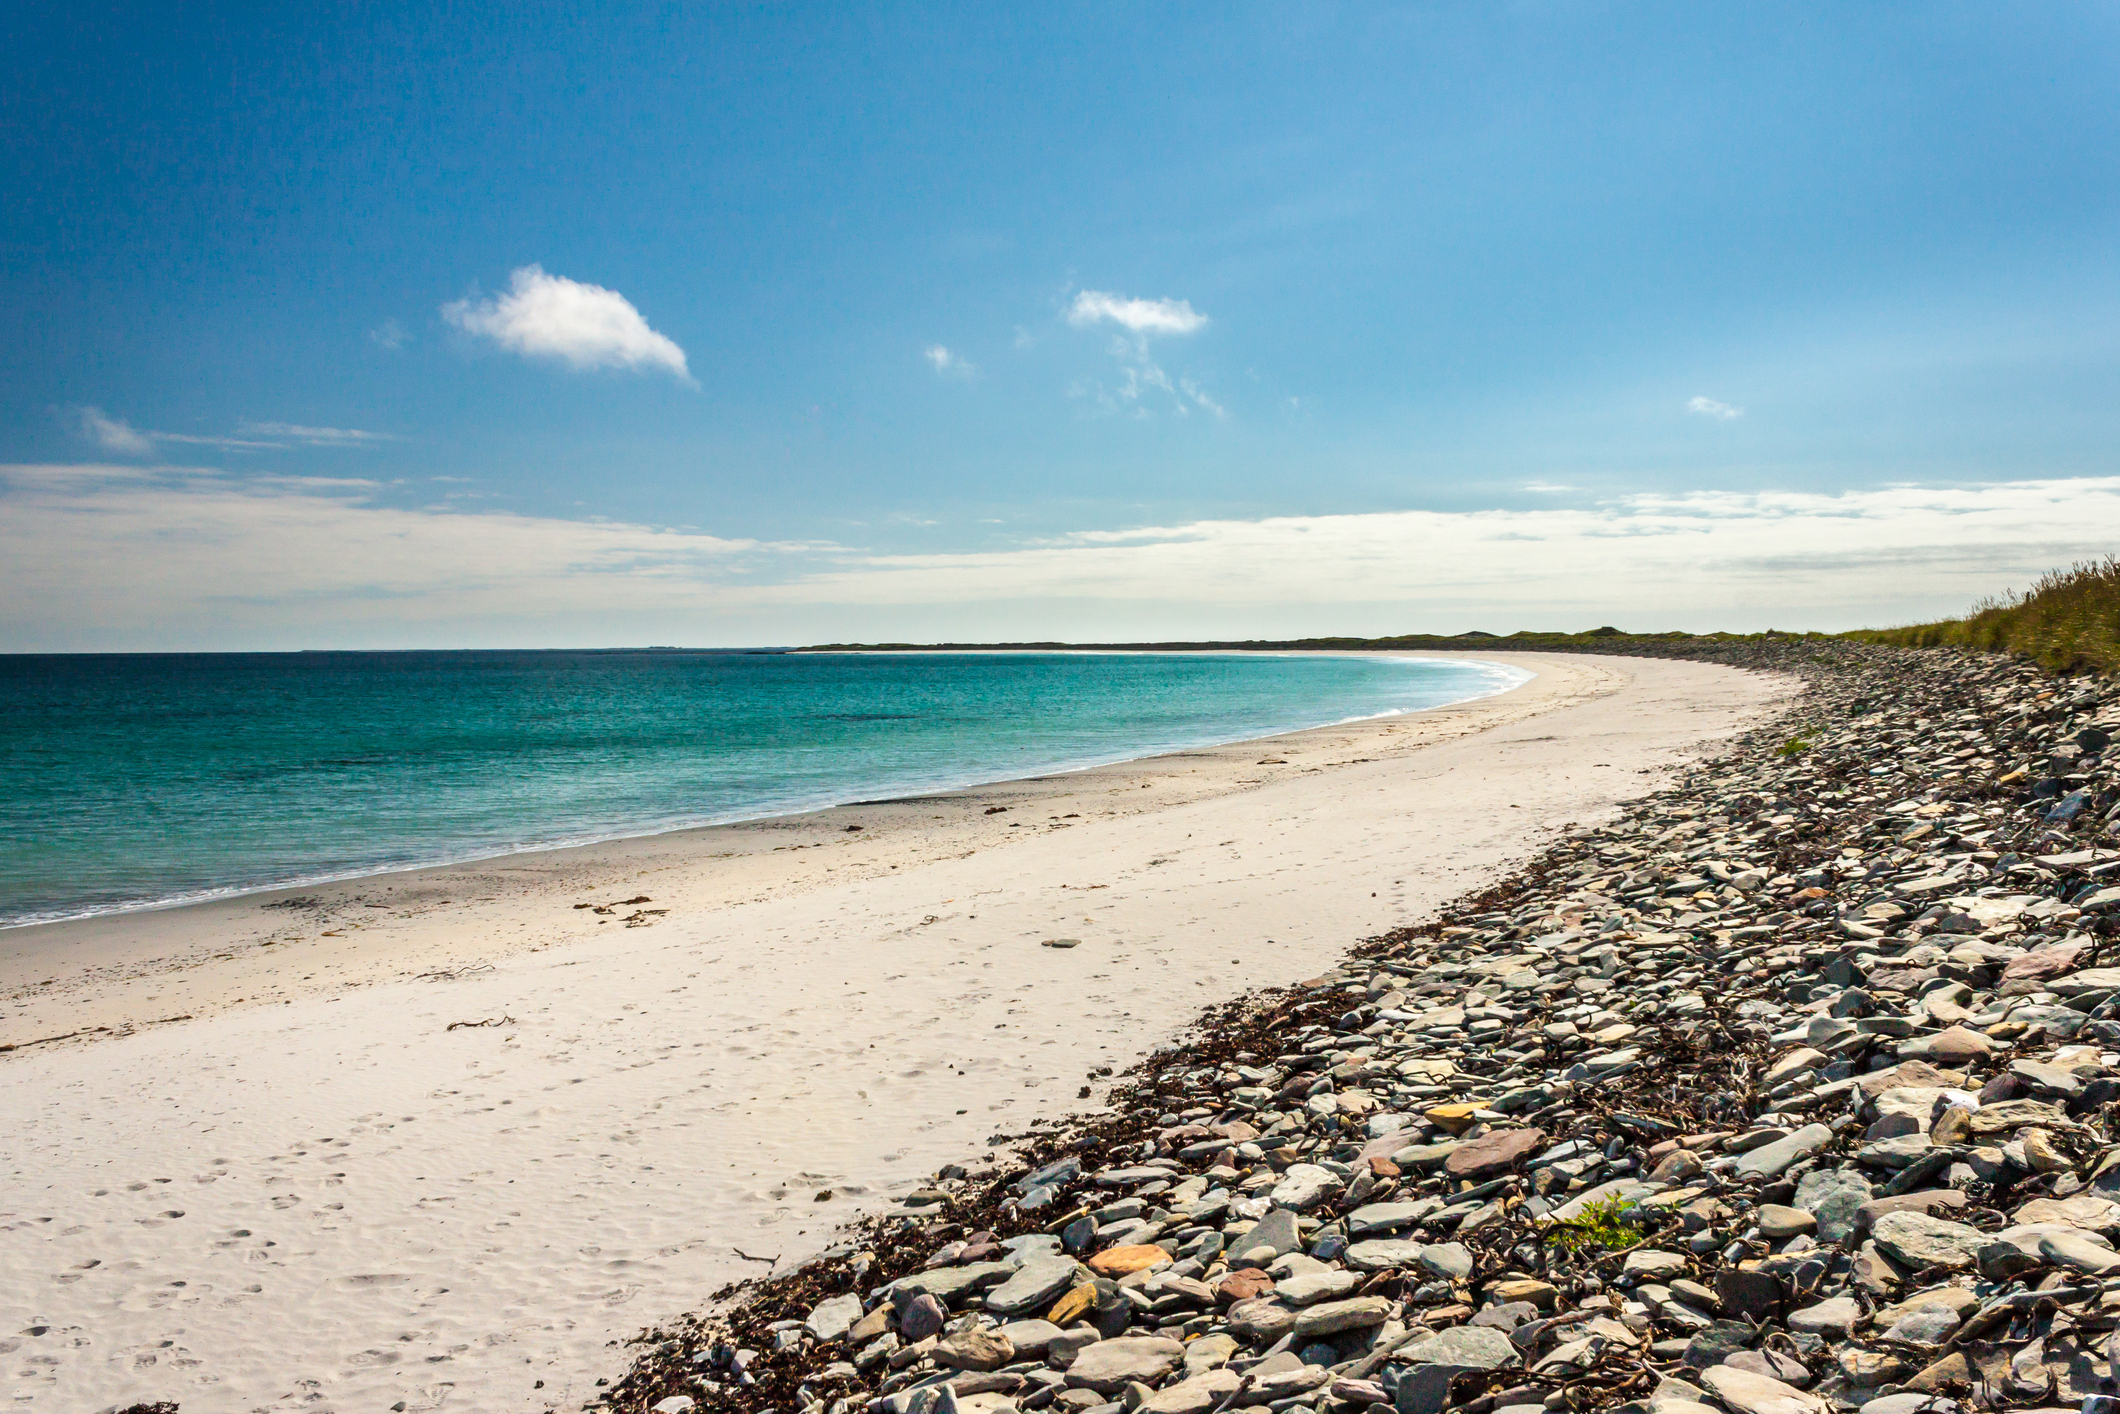 View of remote, white sandy beach at Sanday in Orkney.